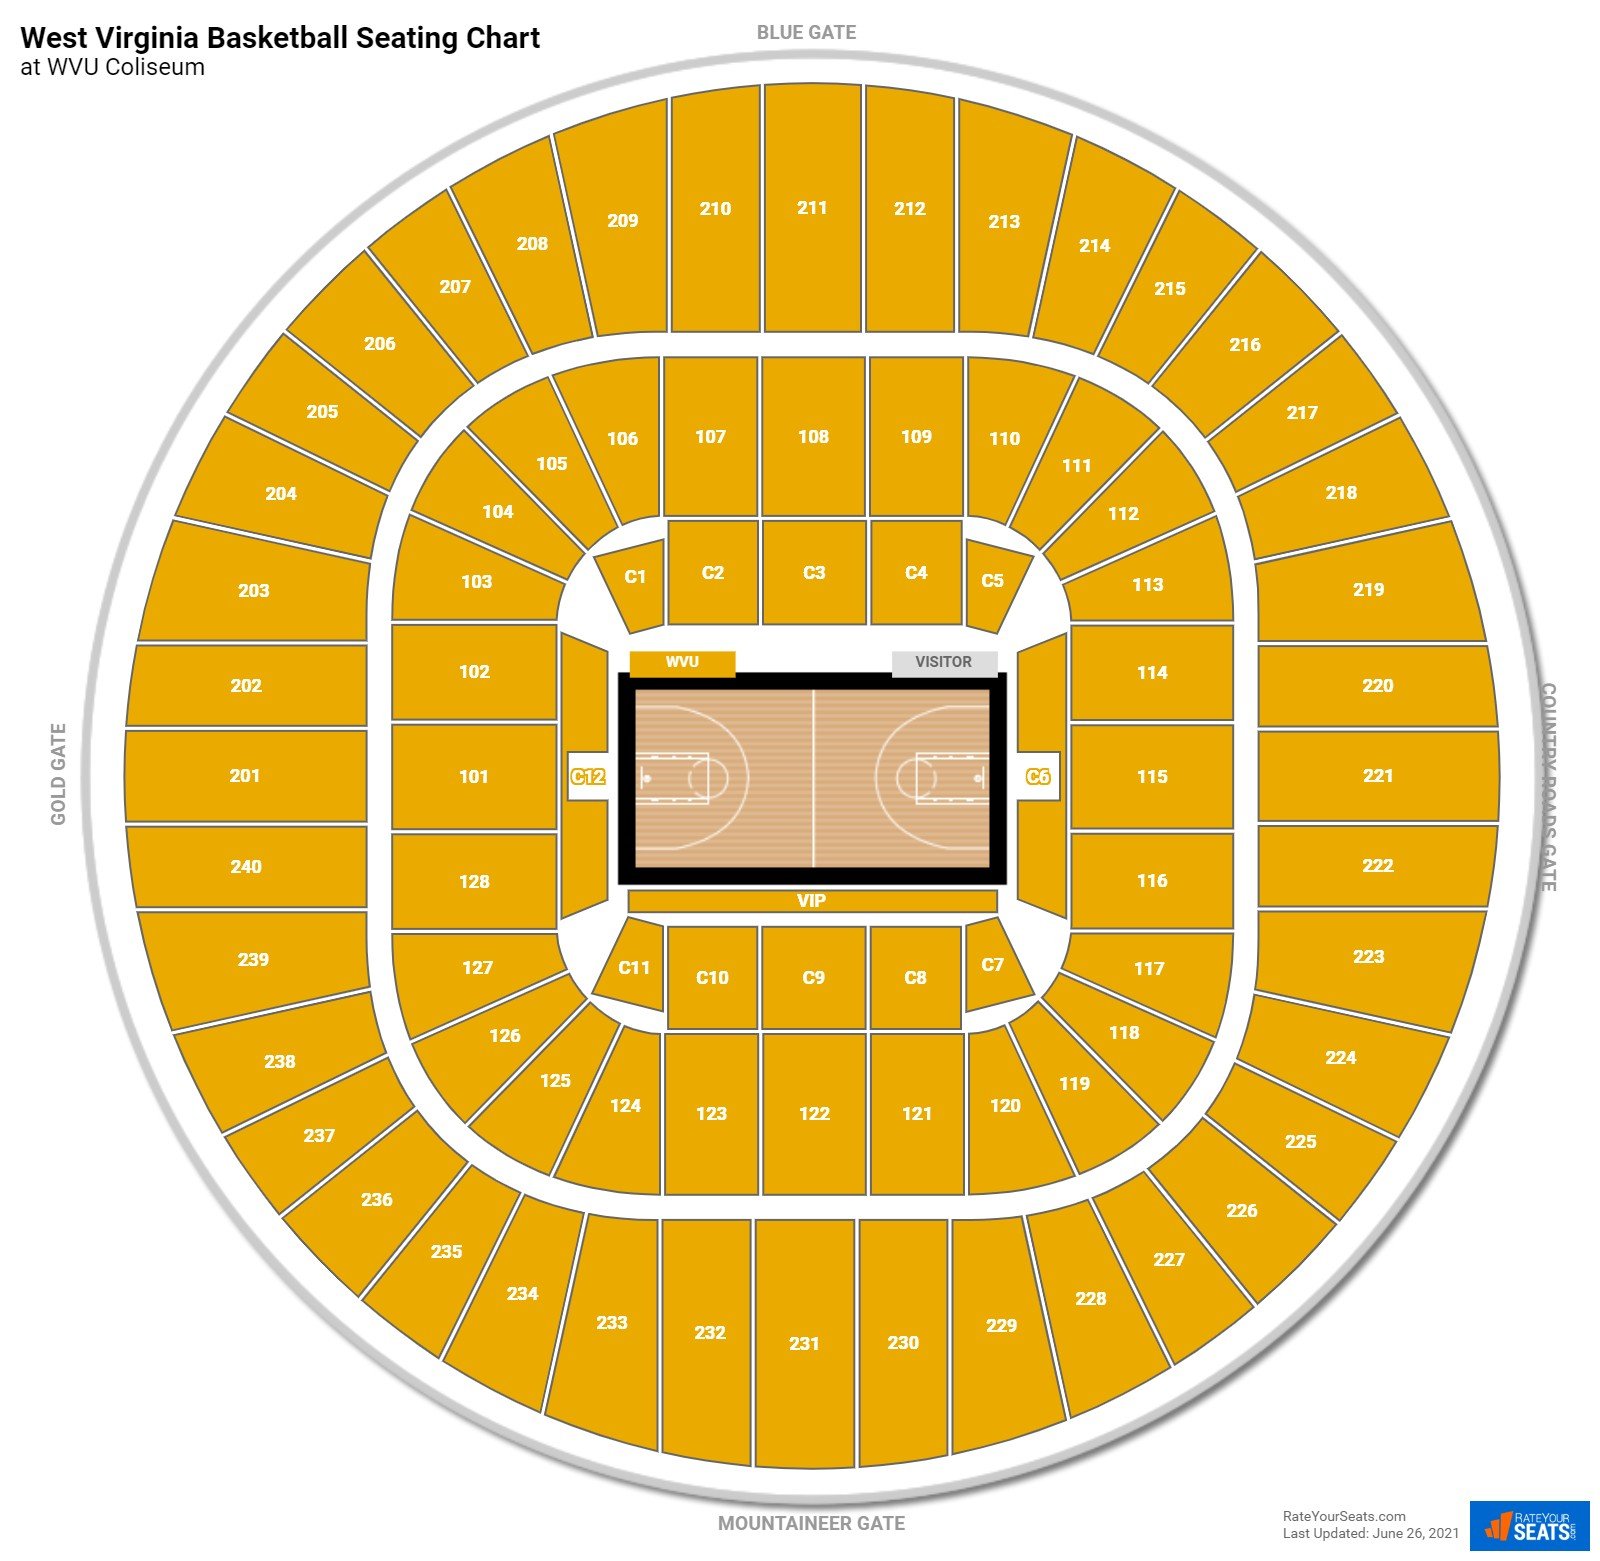 West Virginia Mountaineers Seating Chart at WVU Coliseum